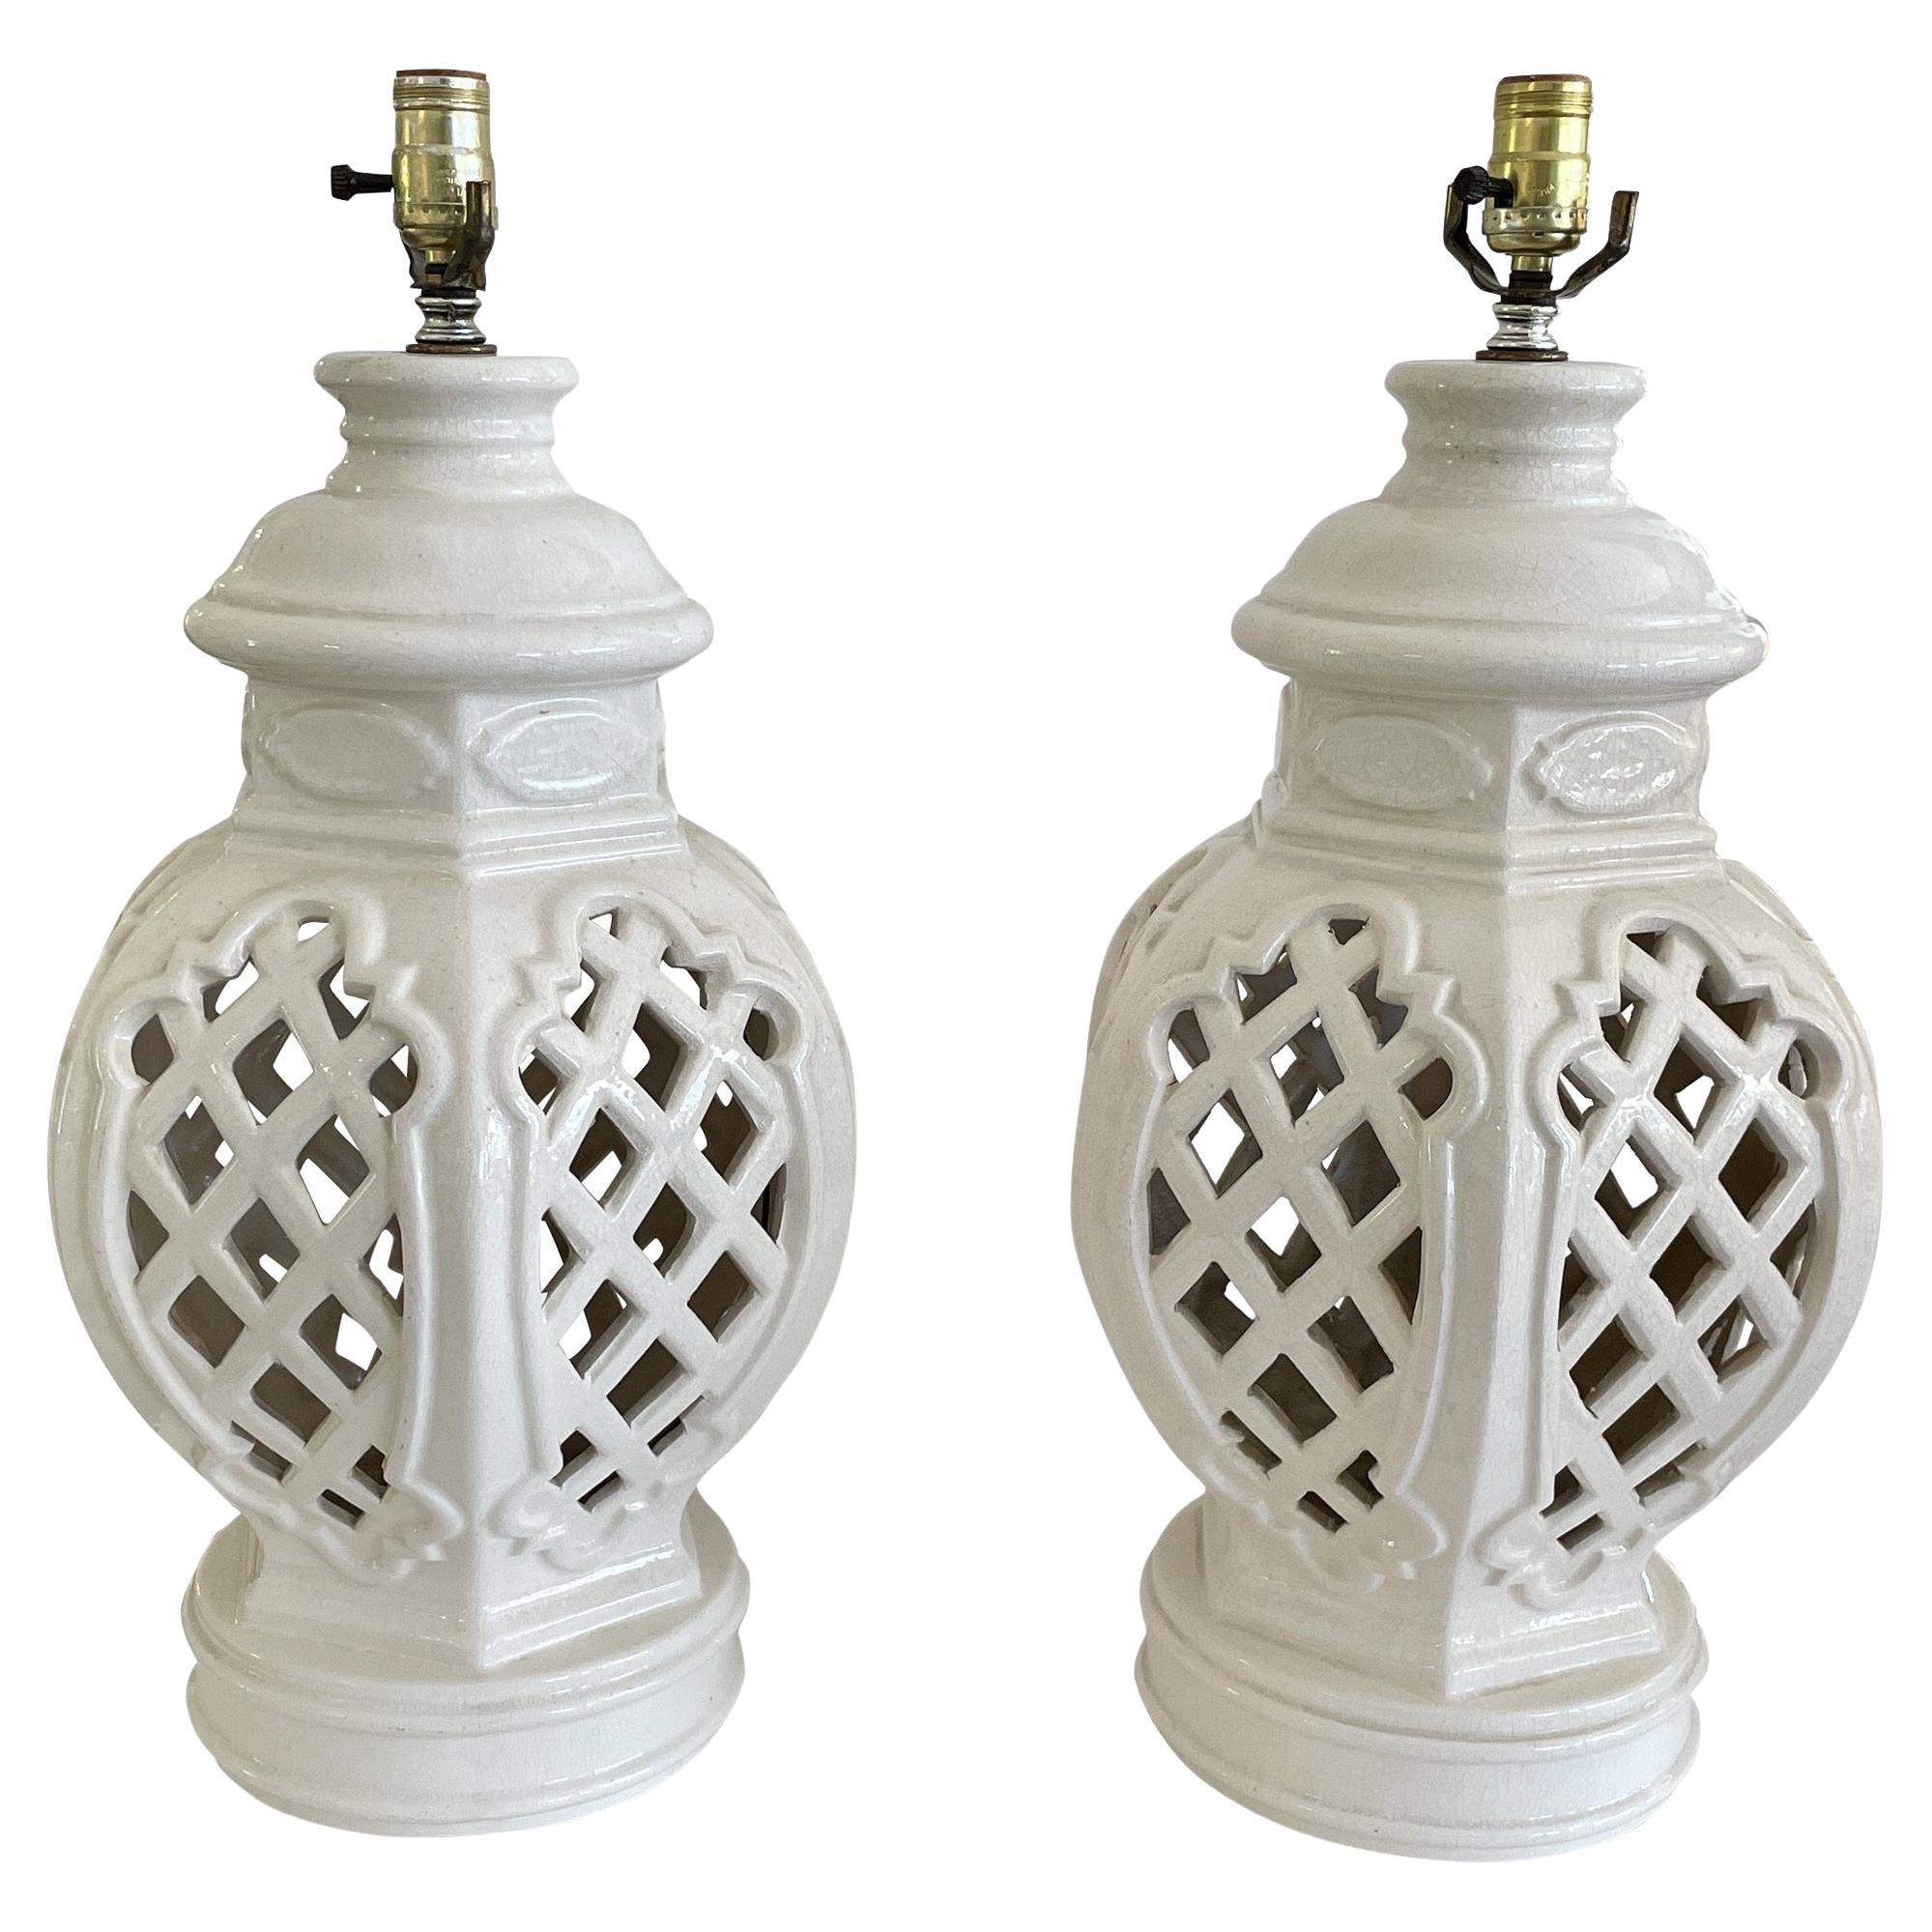 Hollywood Regency Lattice Ginger Jar Table Lamps, a Pair For Sale